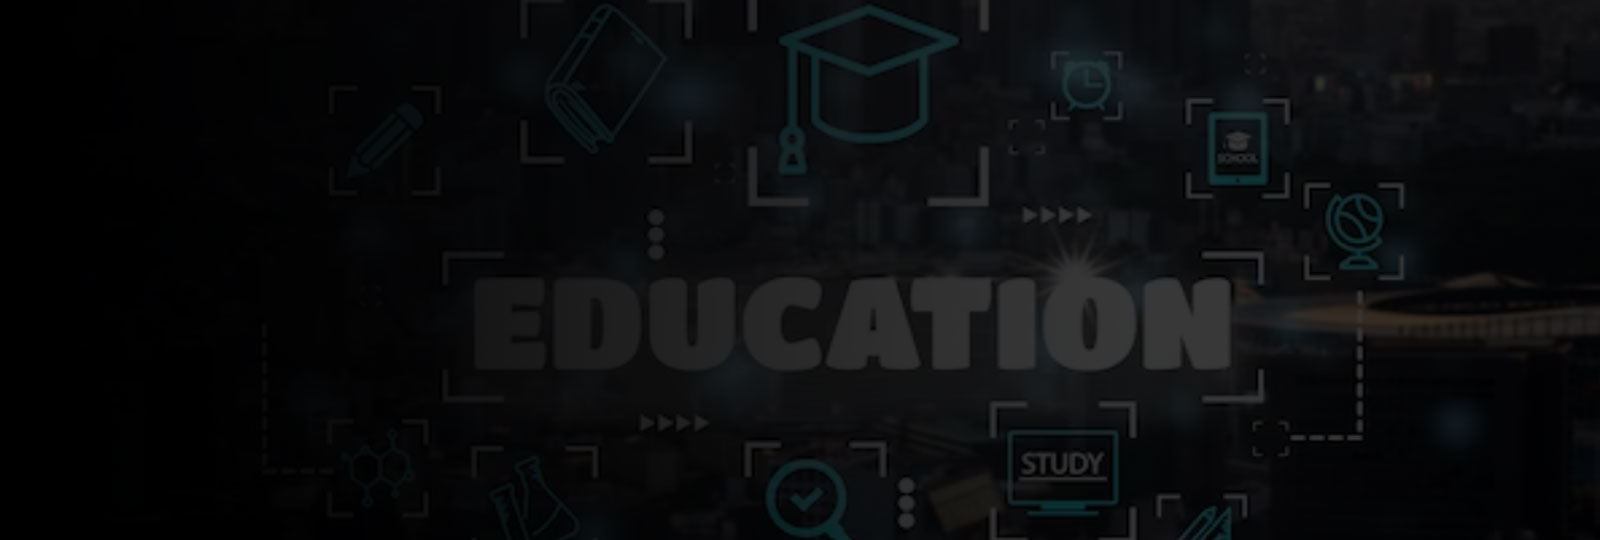 The ultimate ERP solution assists educational institutions with seamless automation.